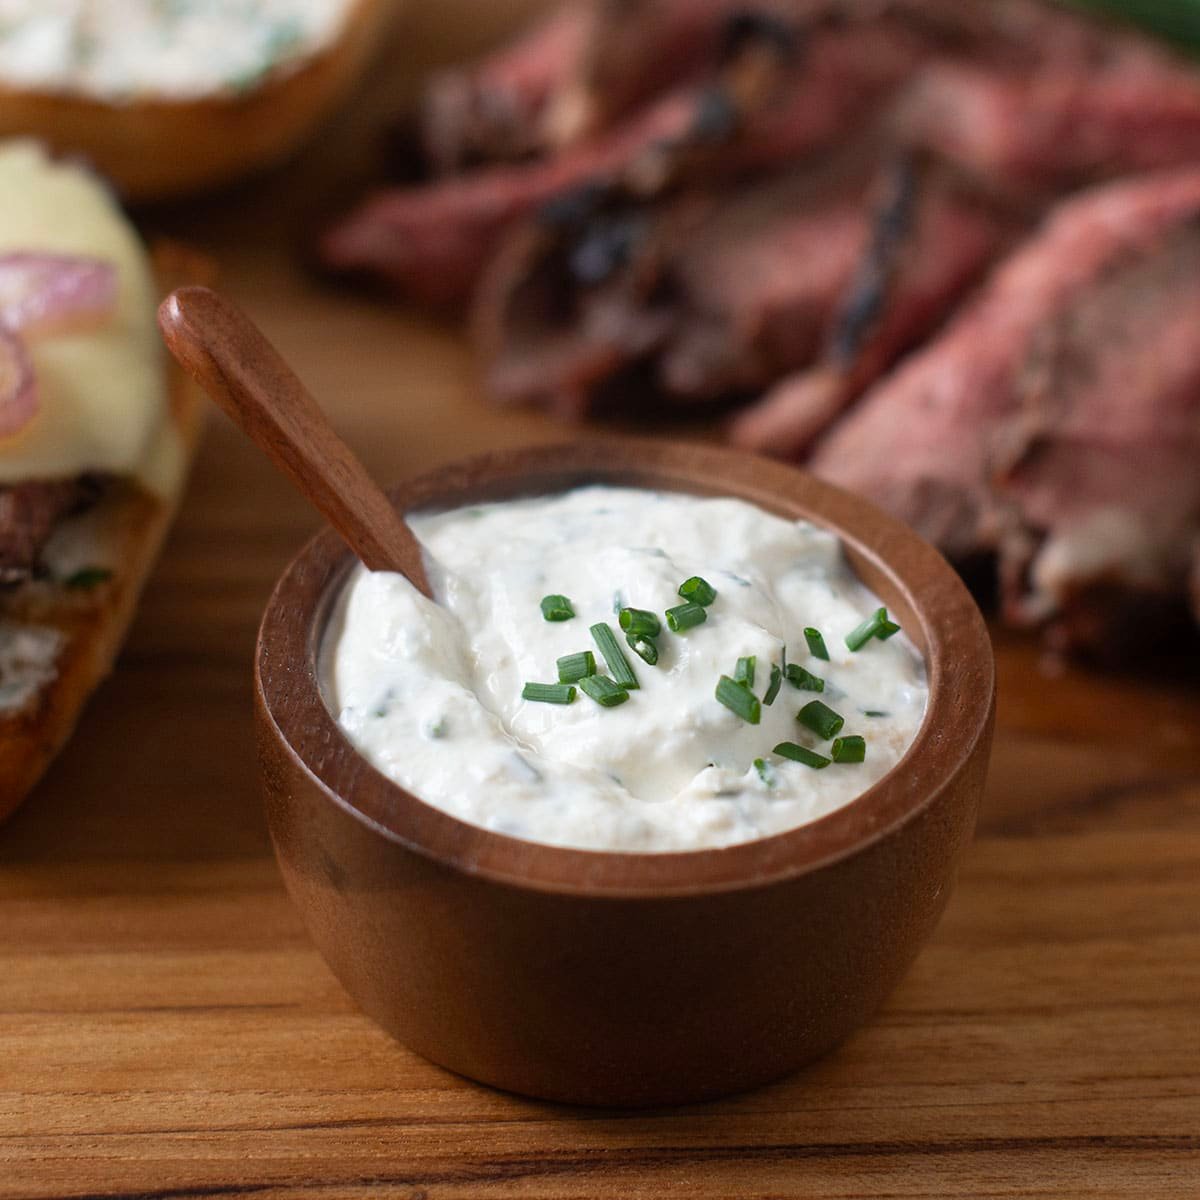 Small wooden bowl of homemade horseradish sauce with sliced tri-tip and beef sandwich in background.